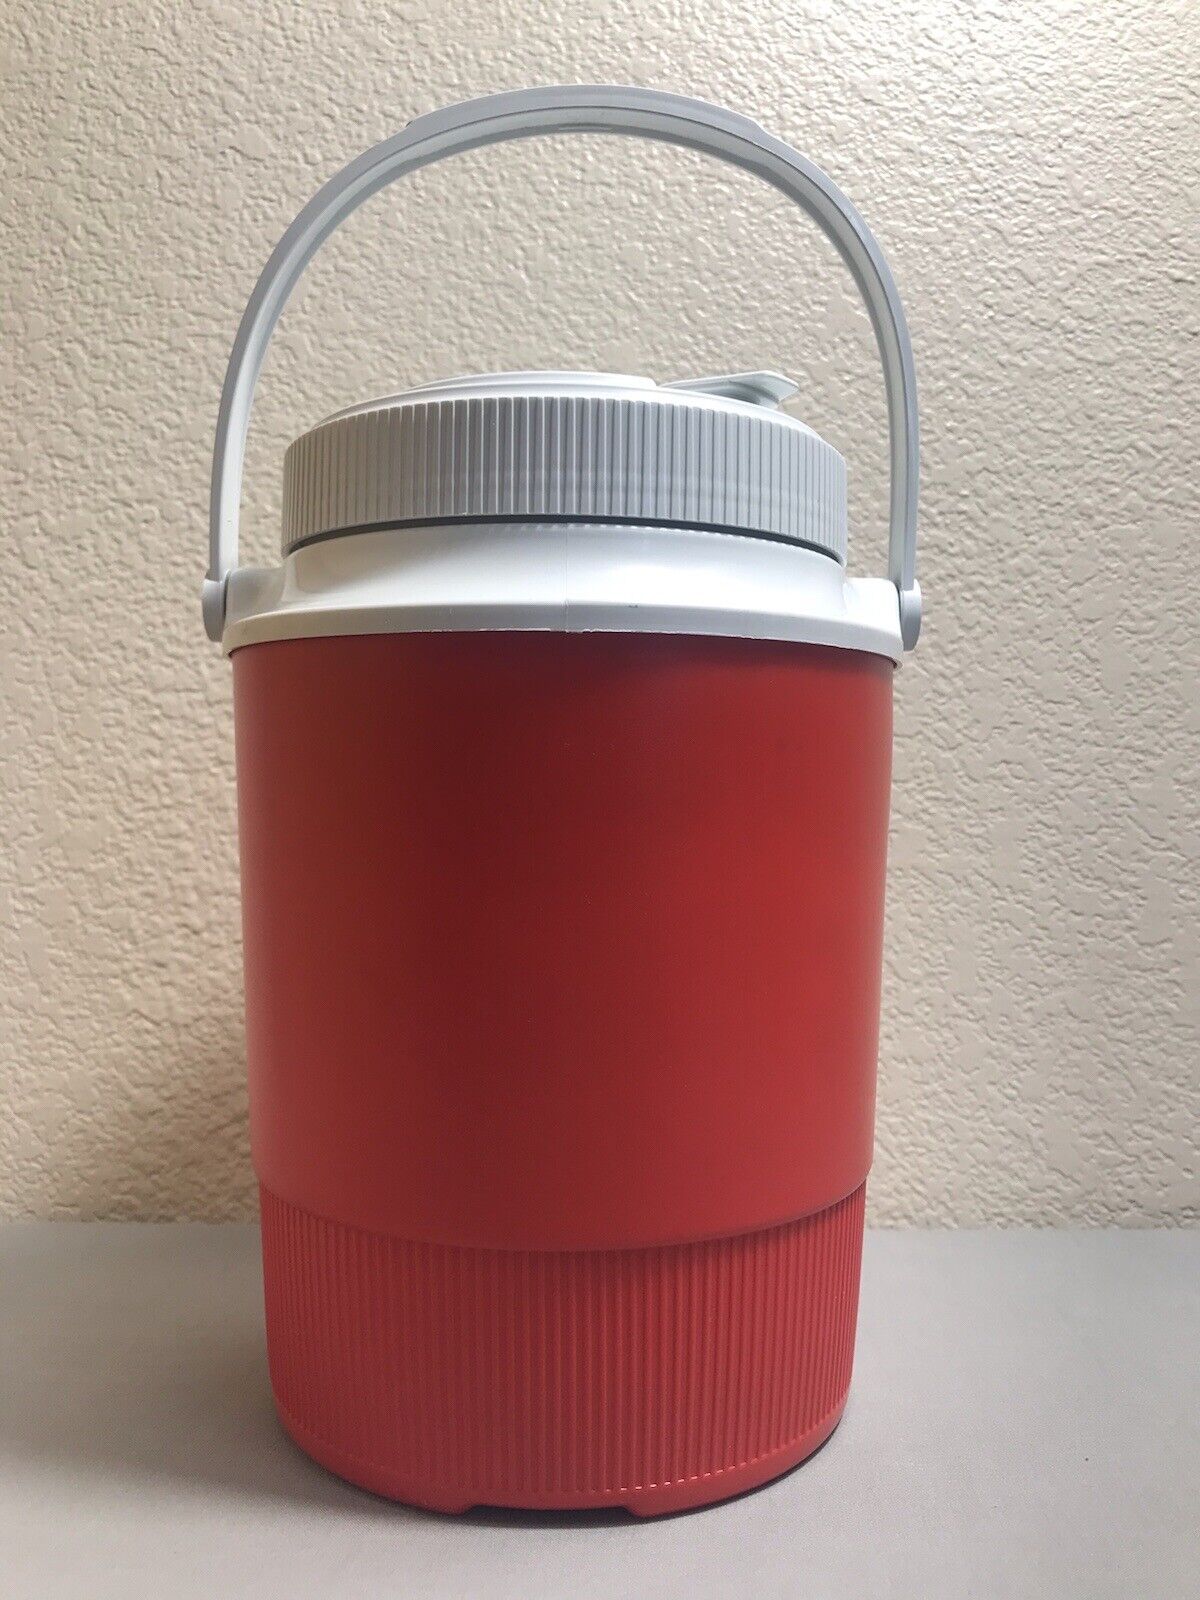 Vintage Gott Cooler (Thermos Style) – Red and White – Model 1502 Winfield Kansas